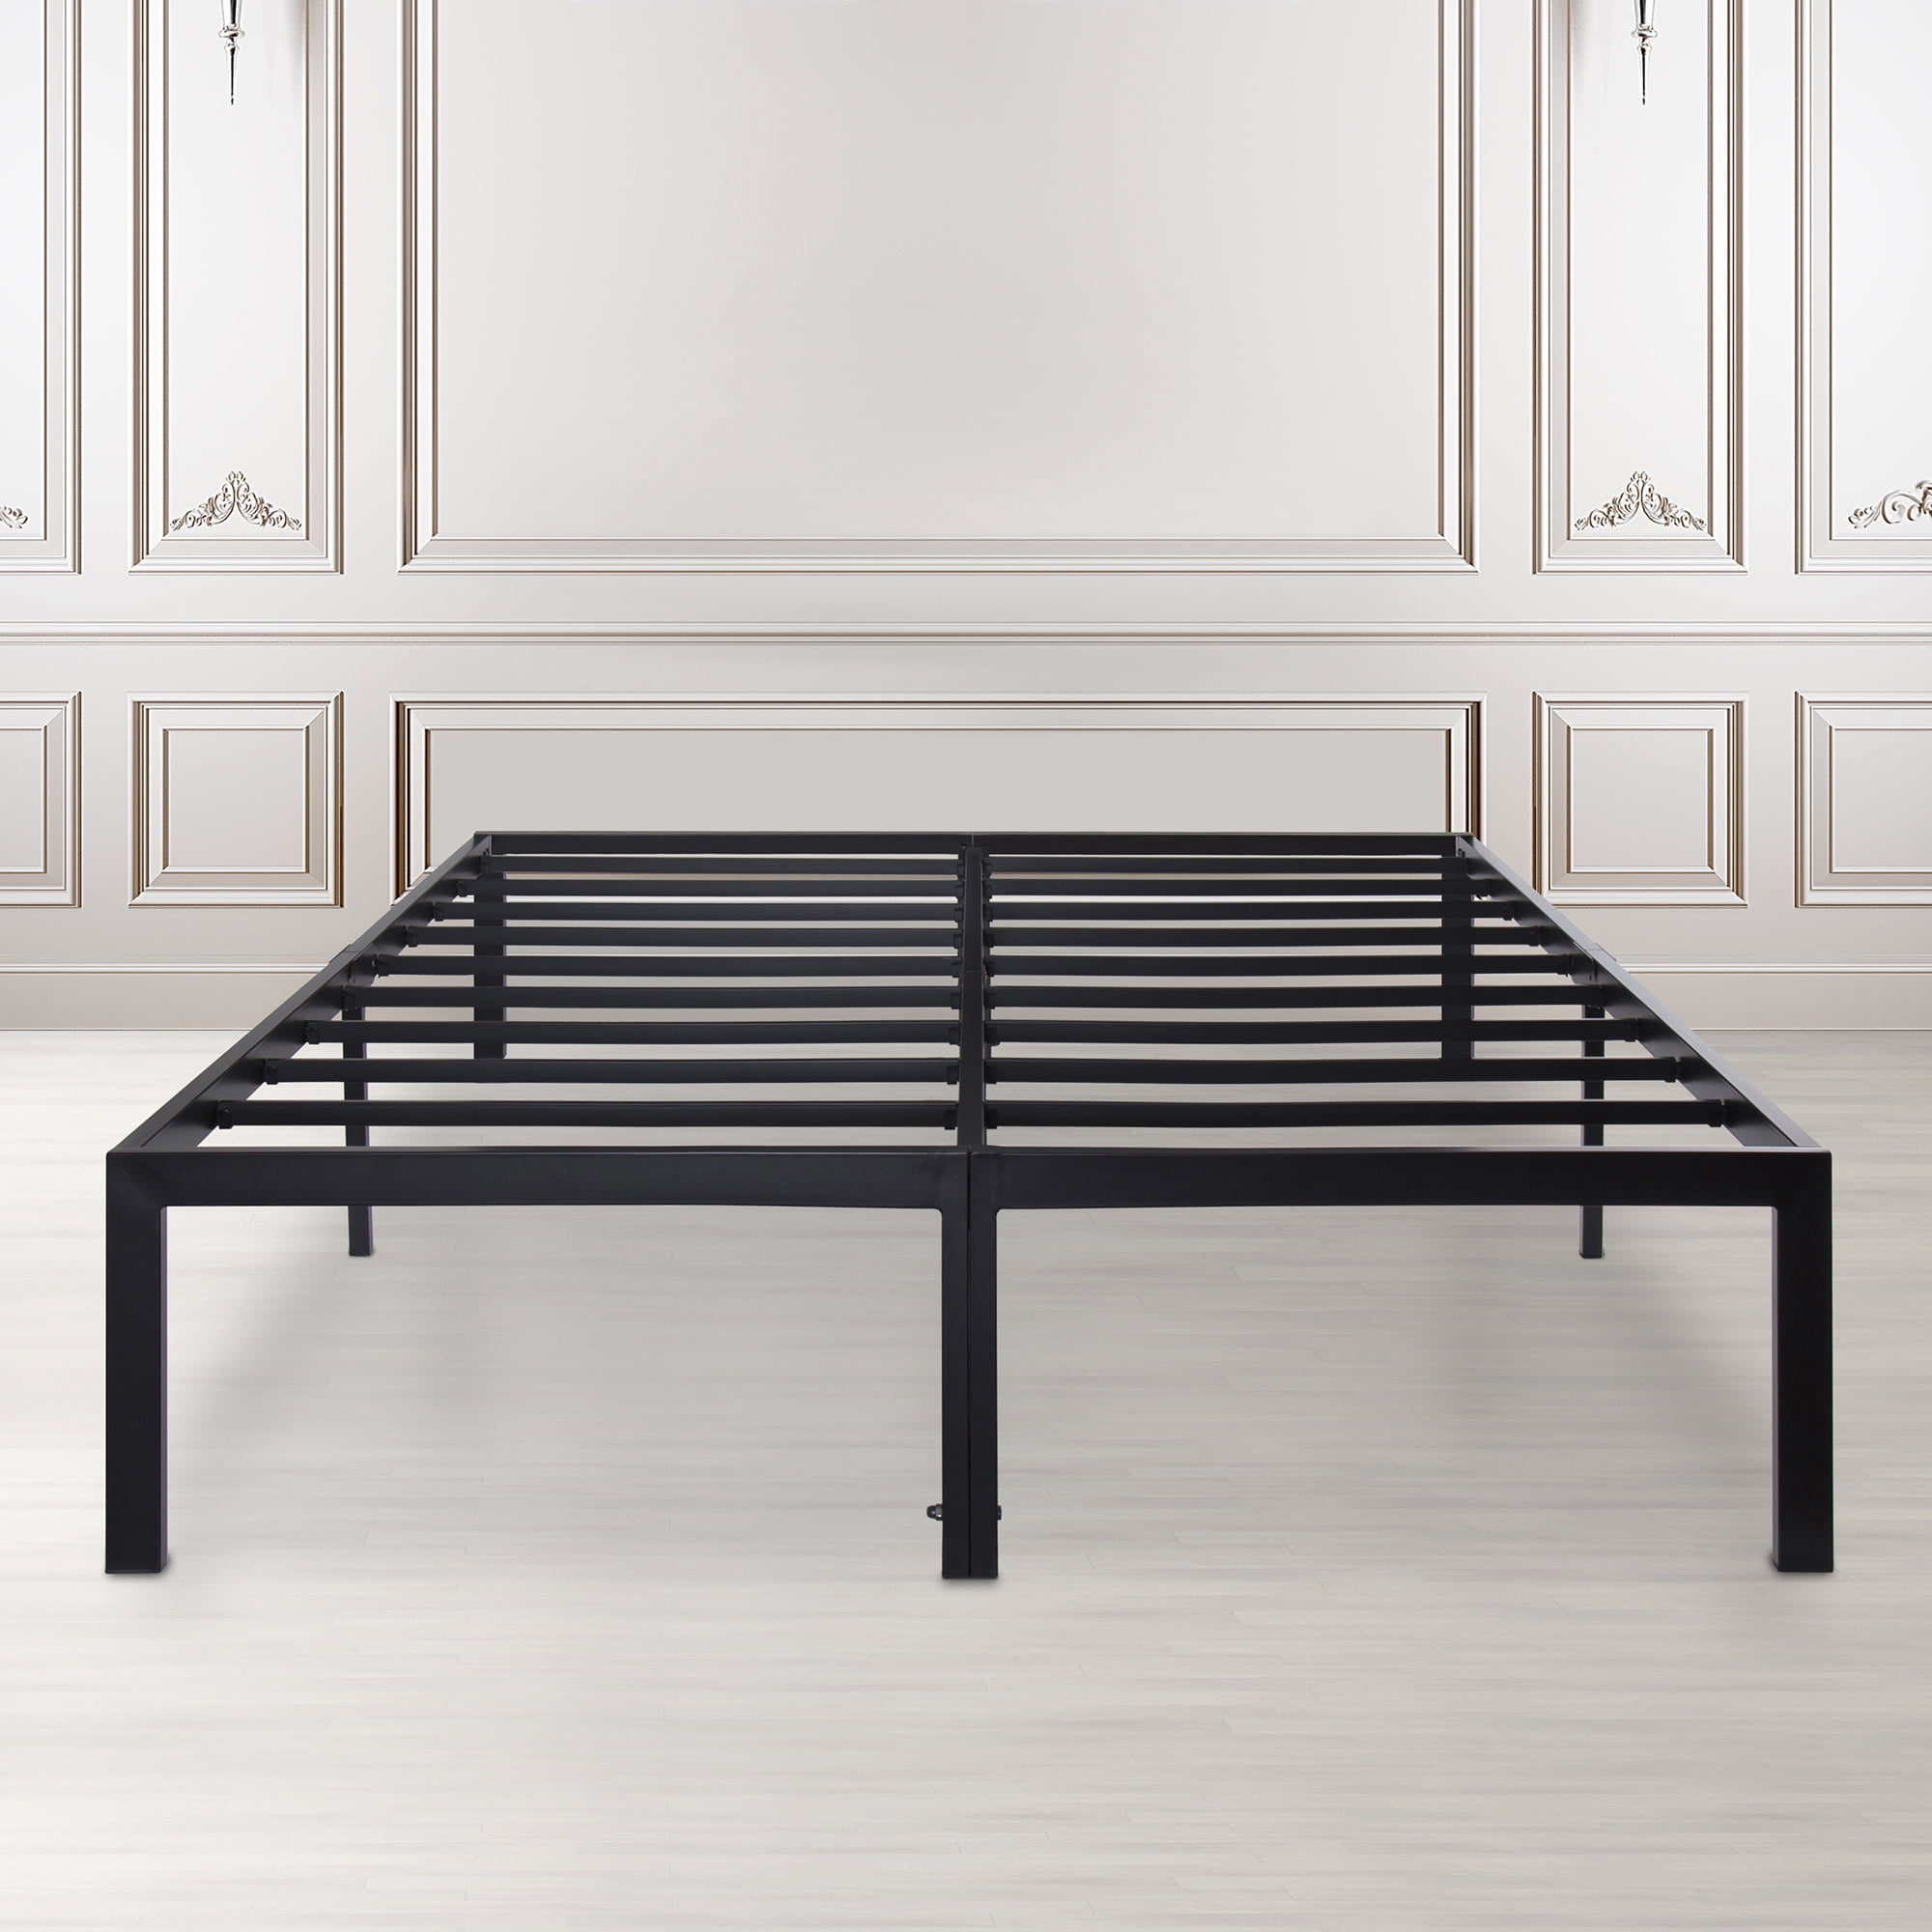 Granrest 14 Dura Metal Bed Frame With Non Slip Feature Queen